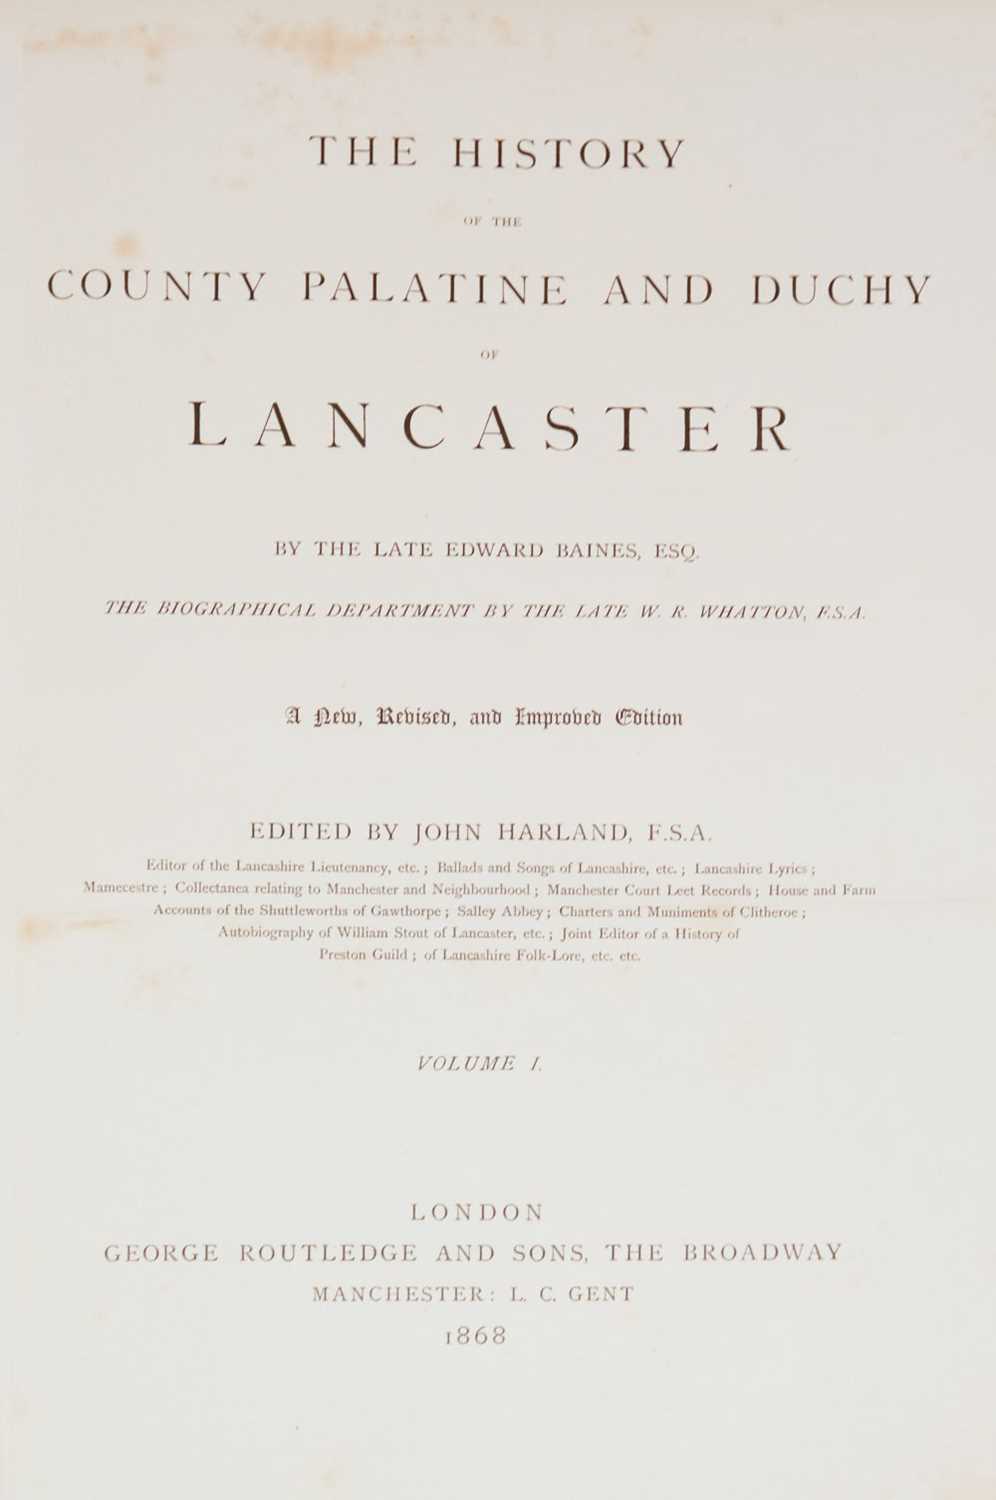 Lot 89 - Baines (Edward). The History of the County Palatine and Duchy of Lancaster, 2 vols., new ed., 1868